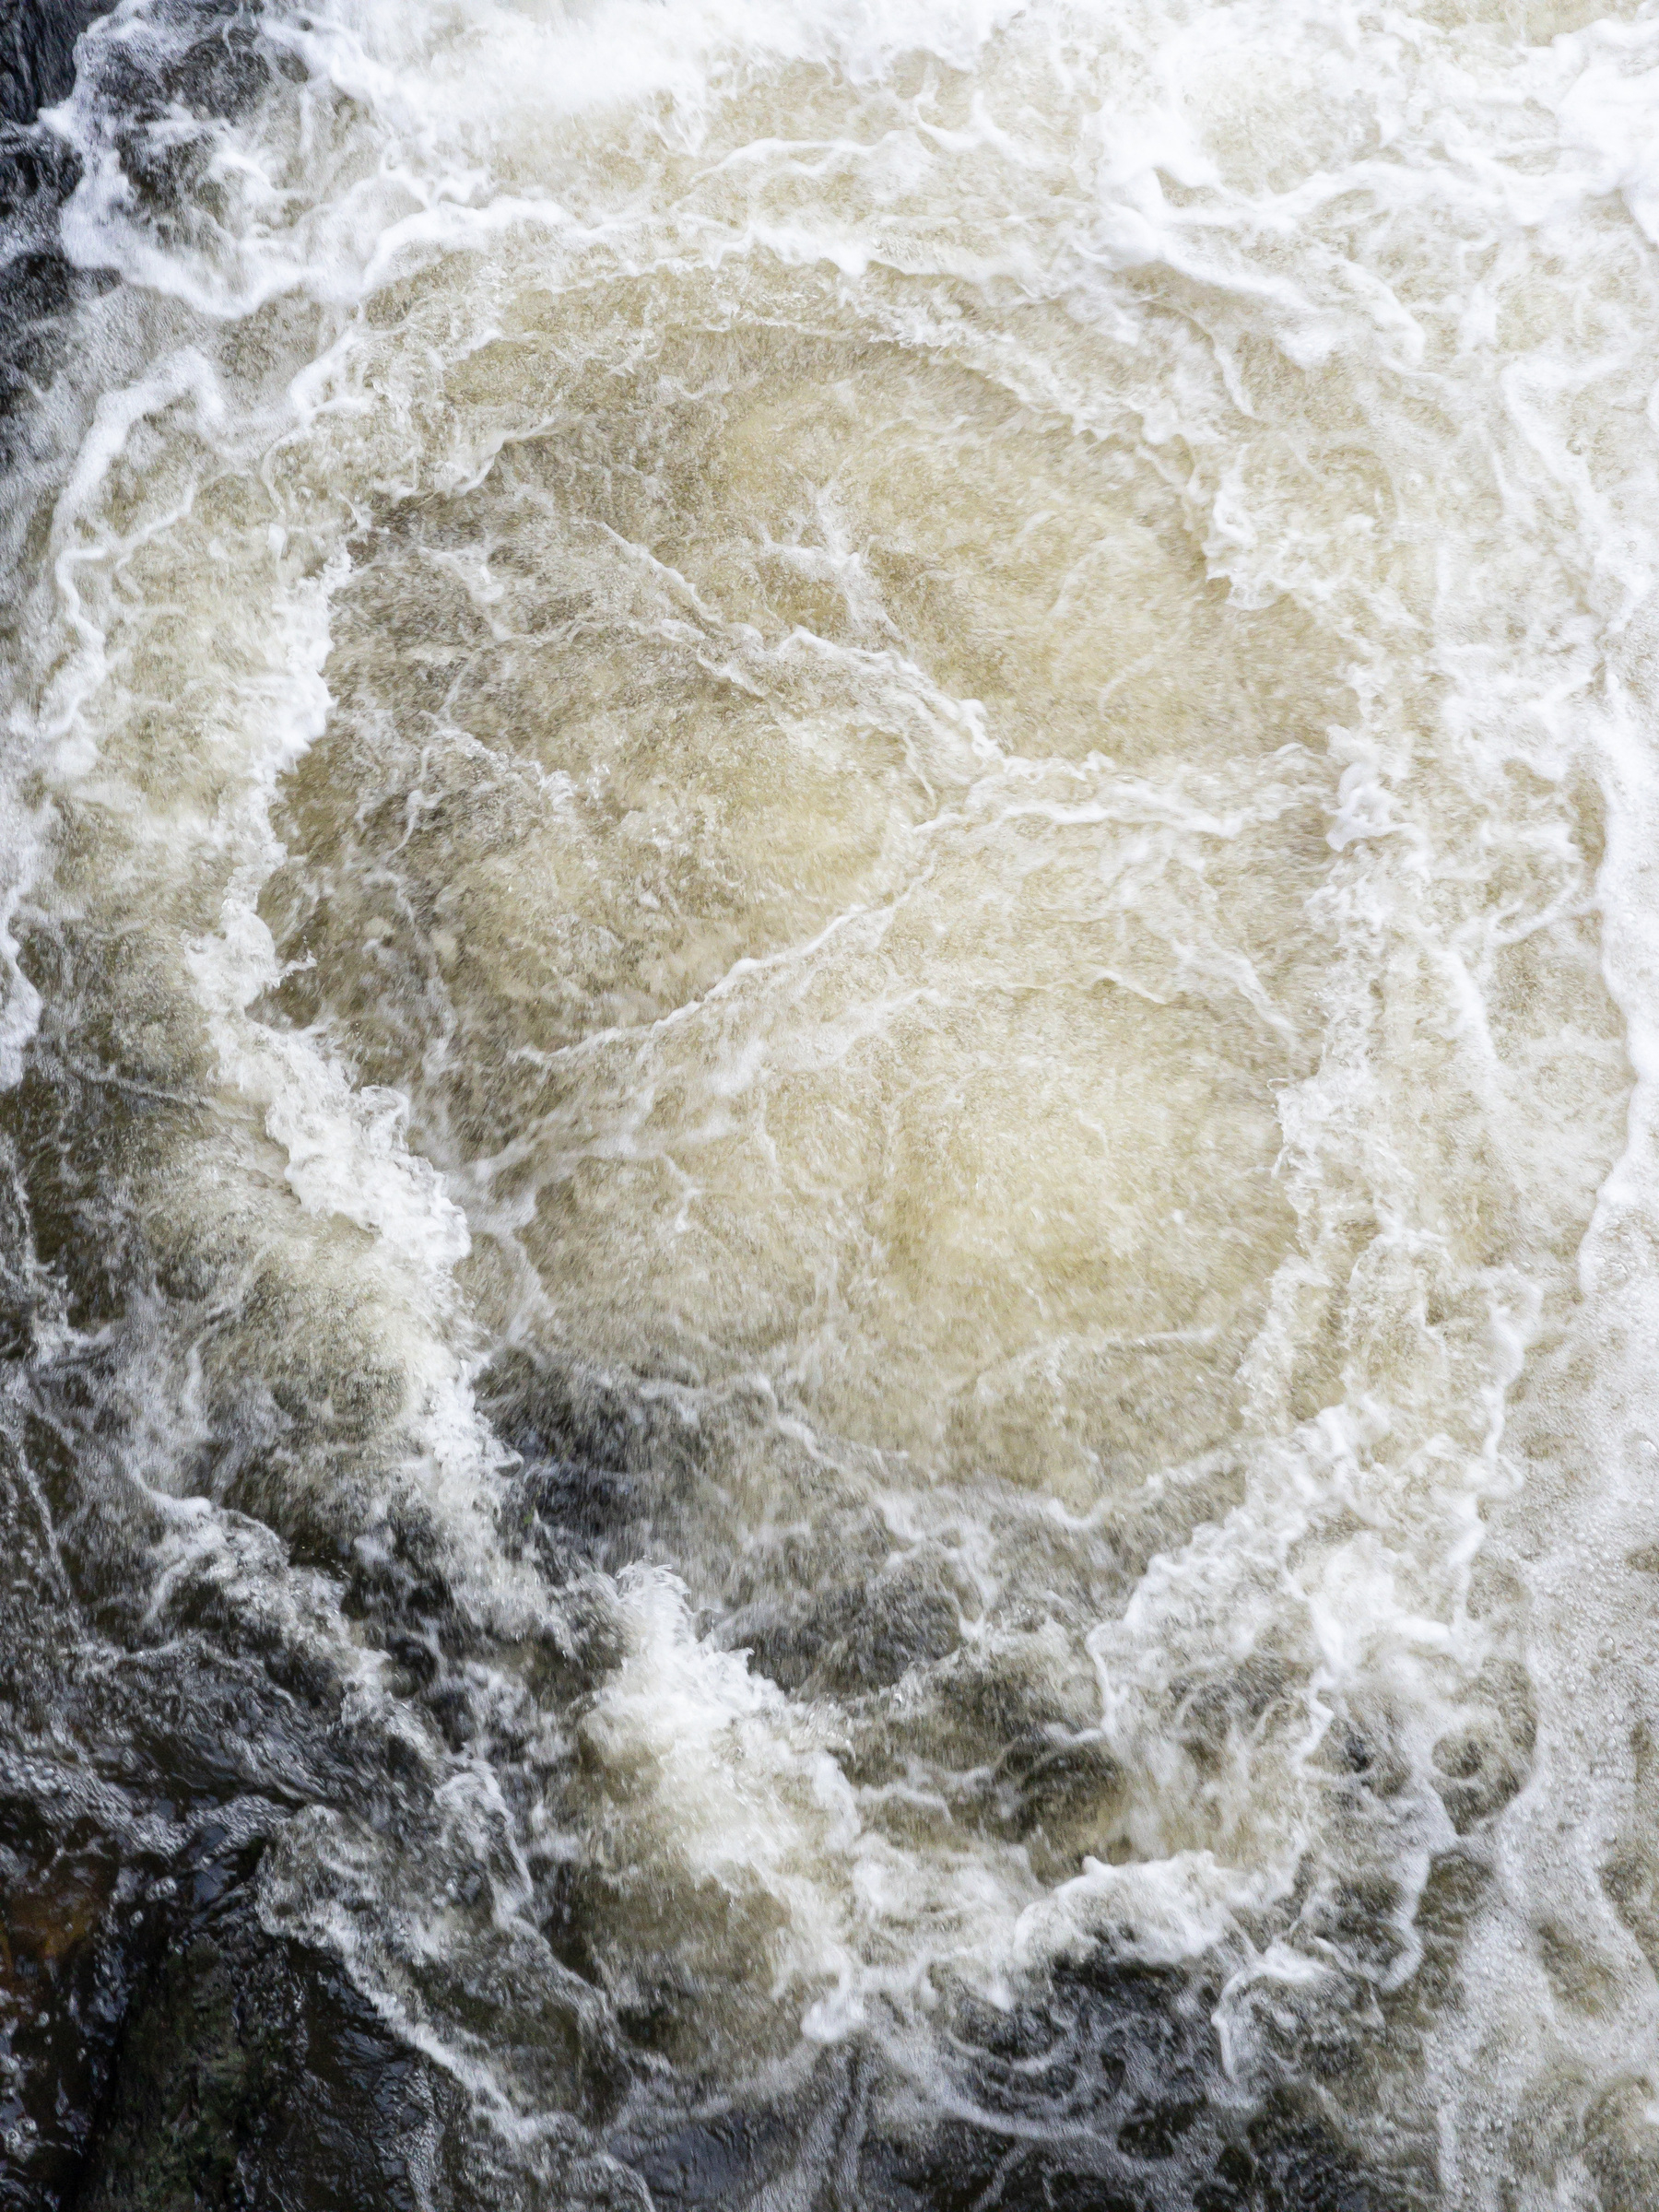 Ring of violently churning water on the surface of a creek.